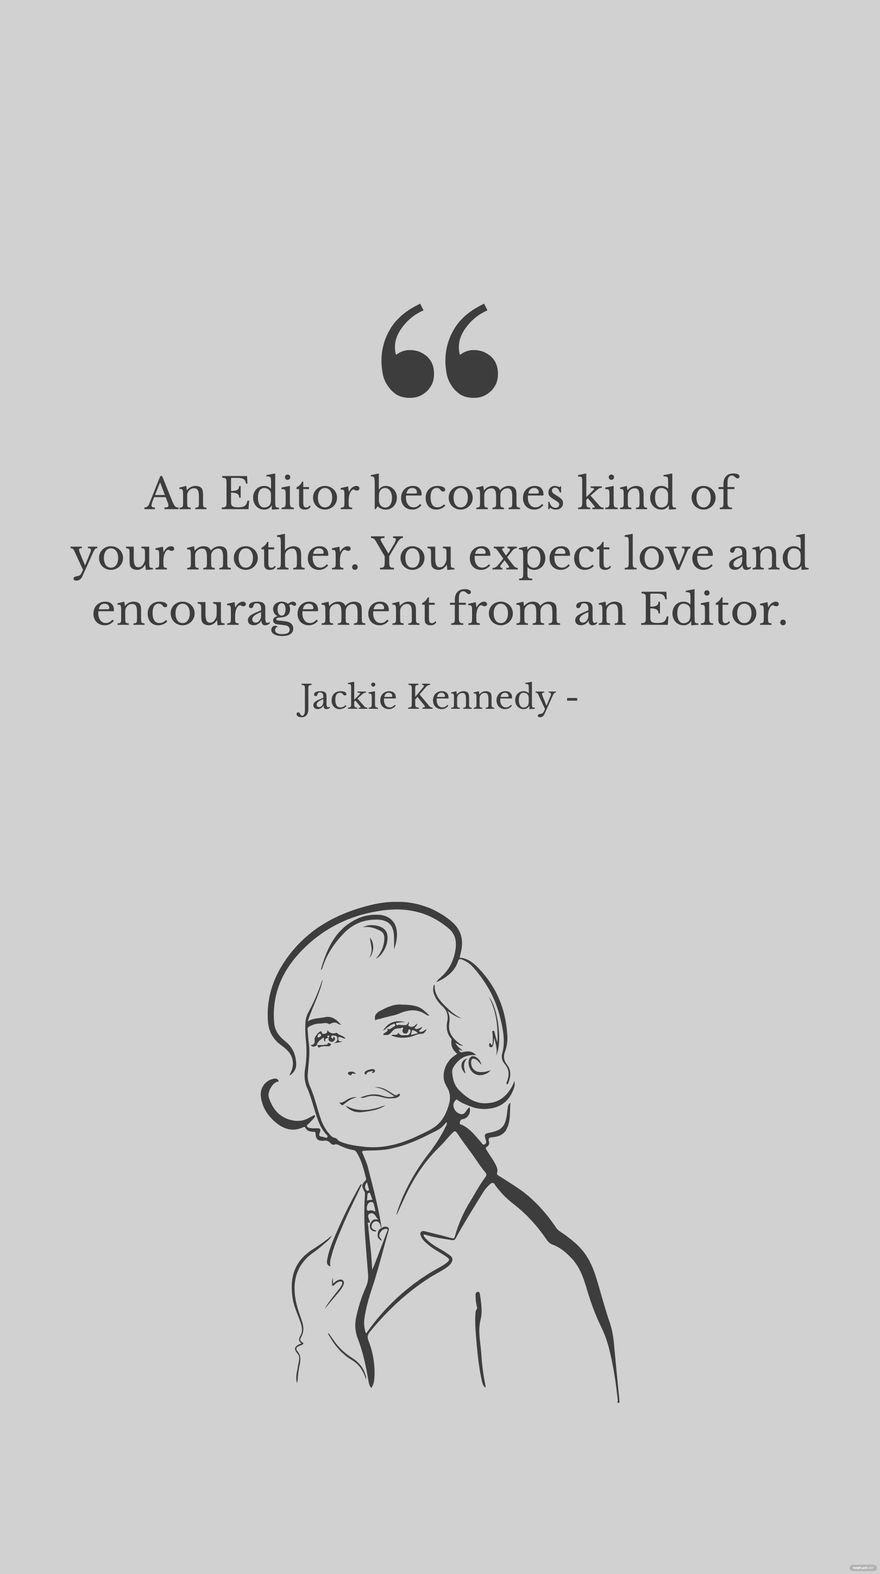 Free Jackie Kennedy - An Editor becomes kind of your mother. You expect love and encouragement from an Editor. Template